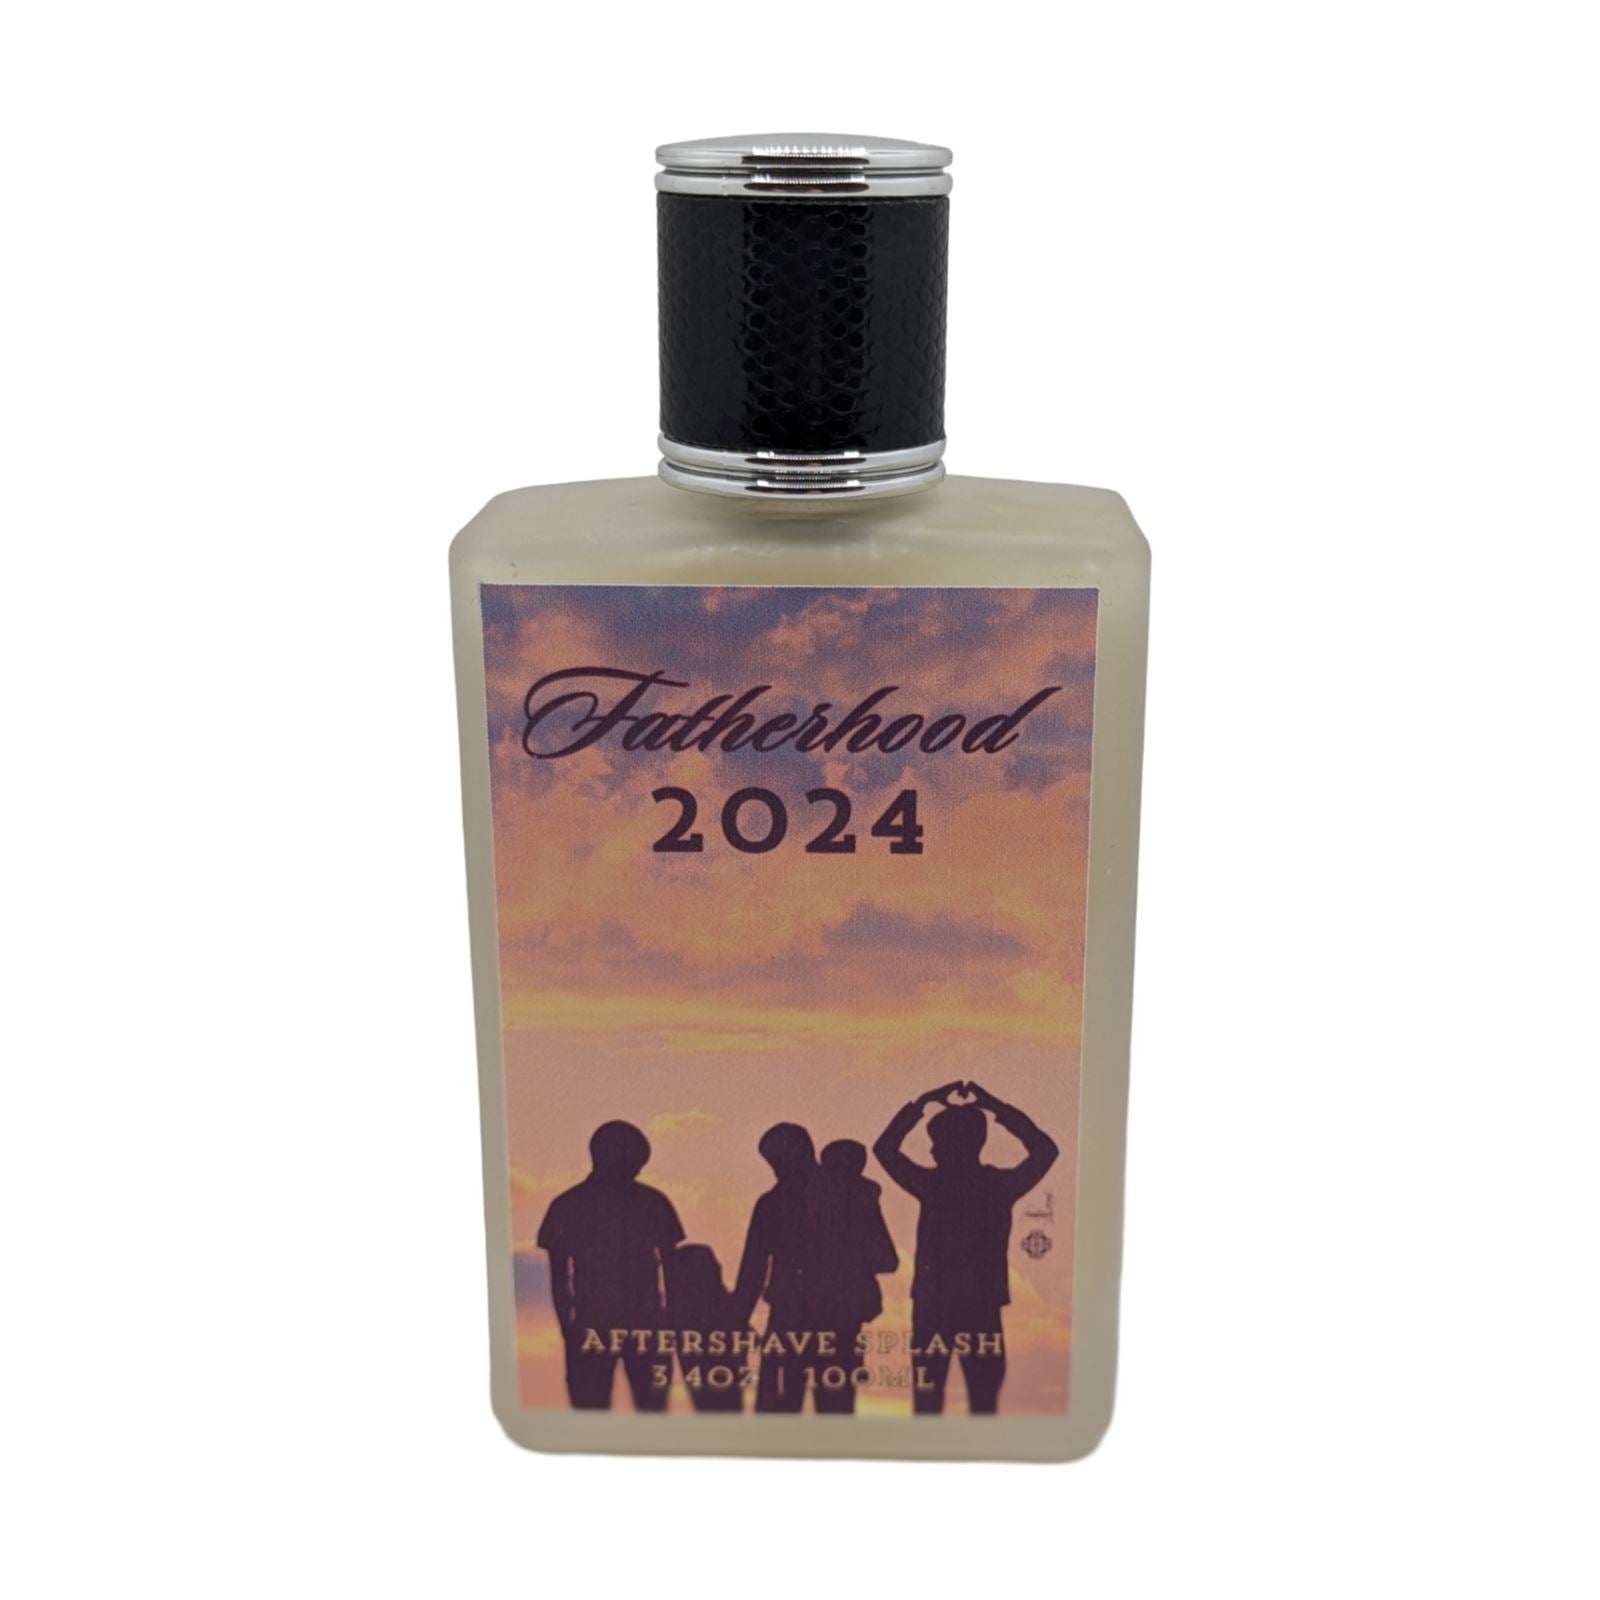 Limited Edition Fatherhood 2024 - Murphy and McNeil Shaving Soap Murphy and McNeil Store Aftershave Splash (Alcohol Free) 